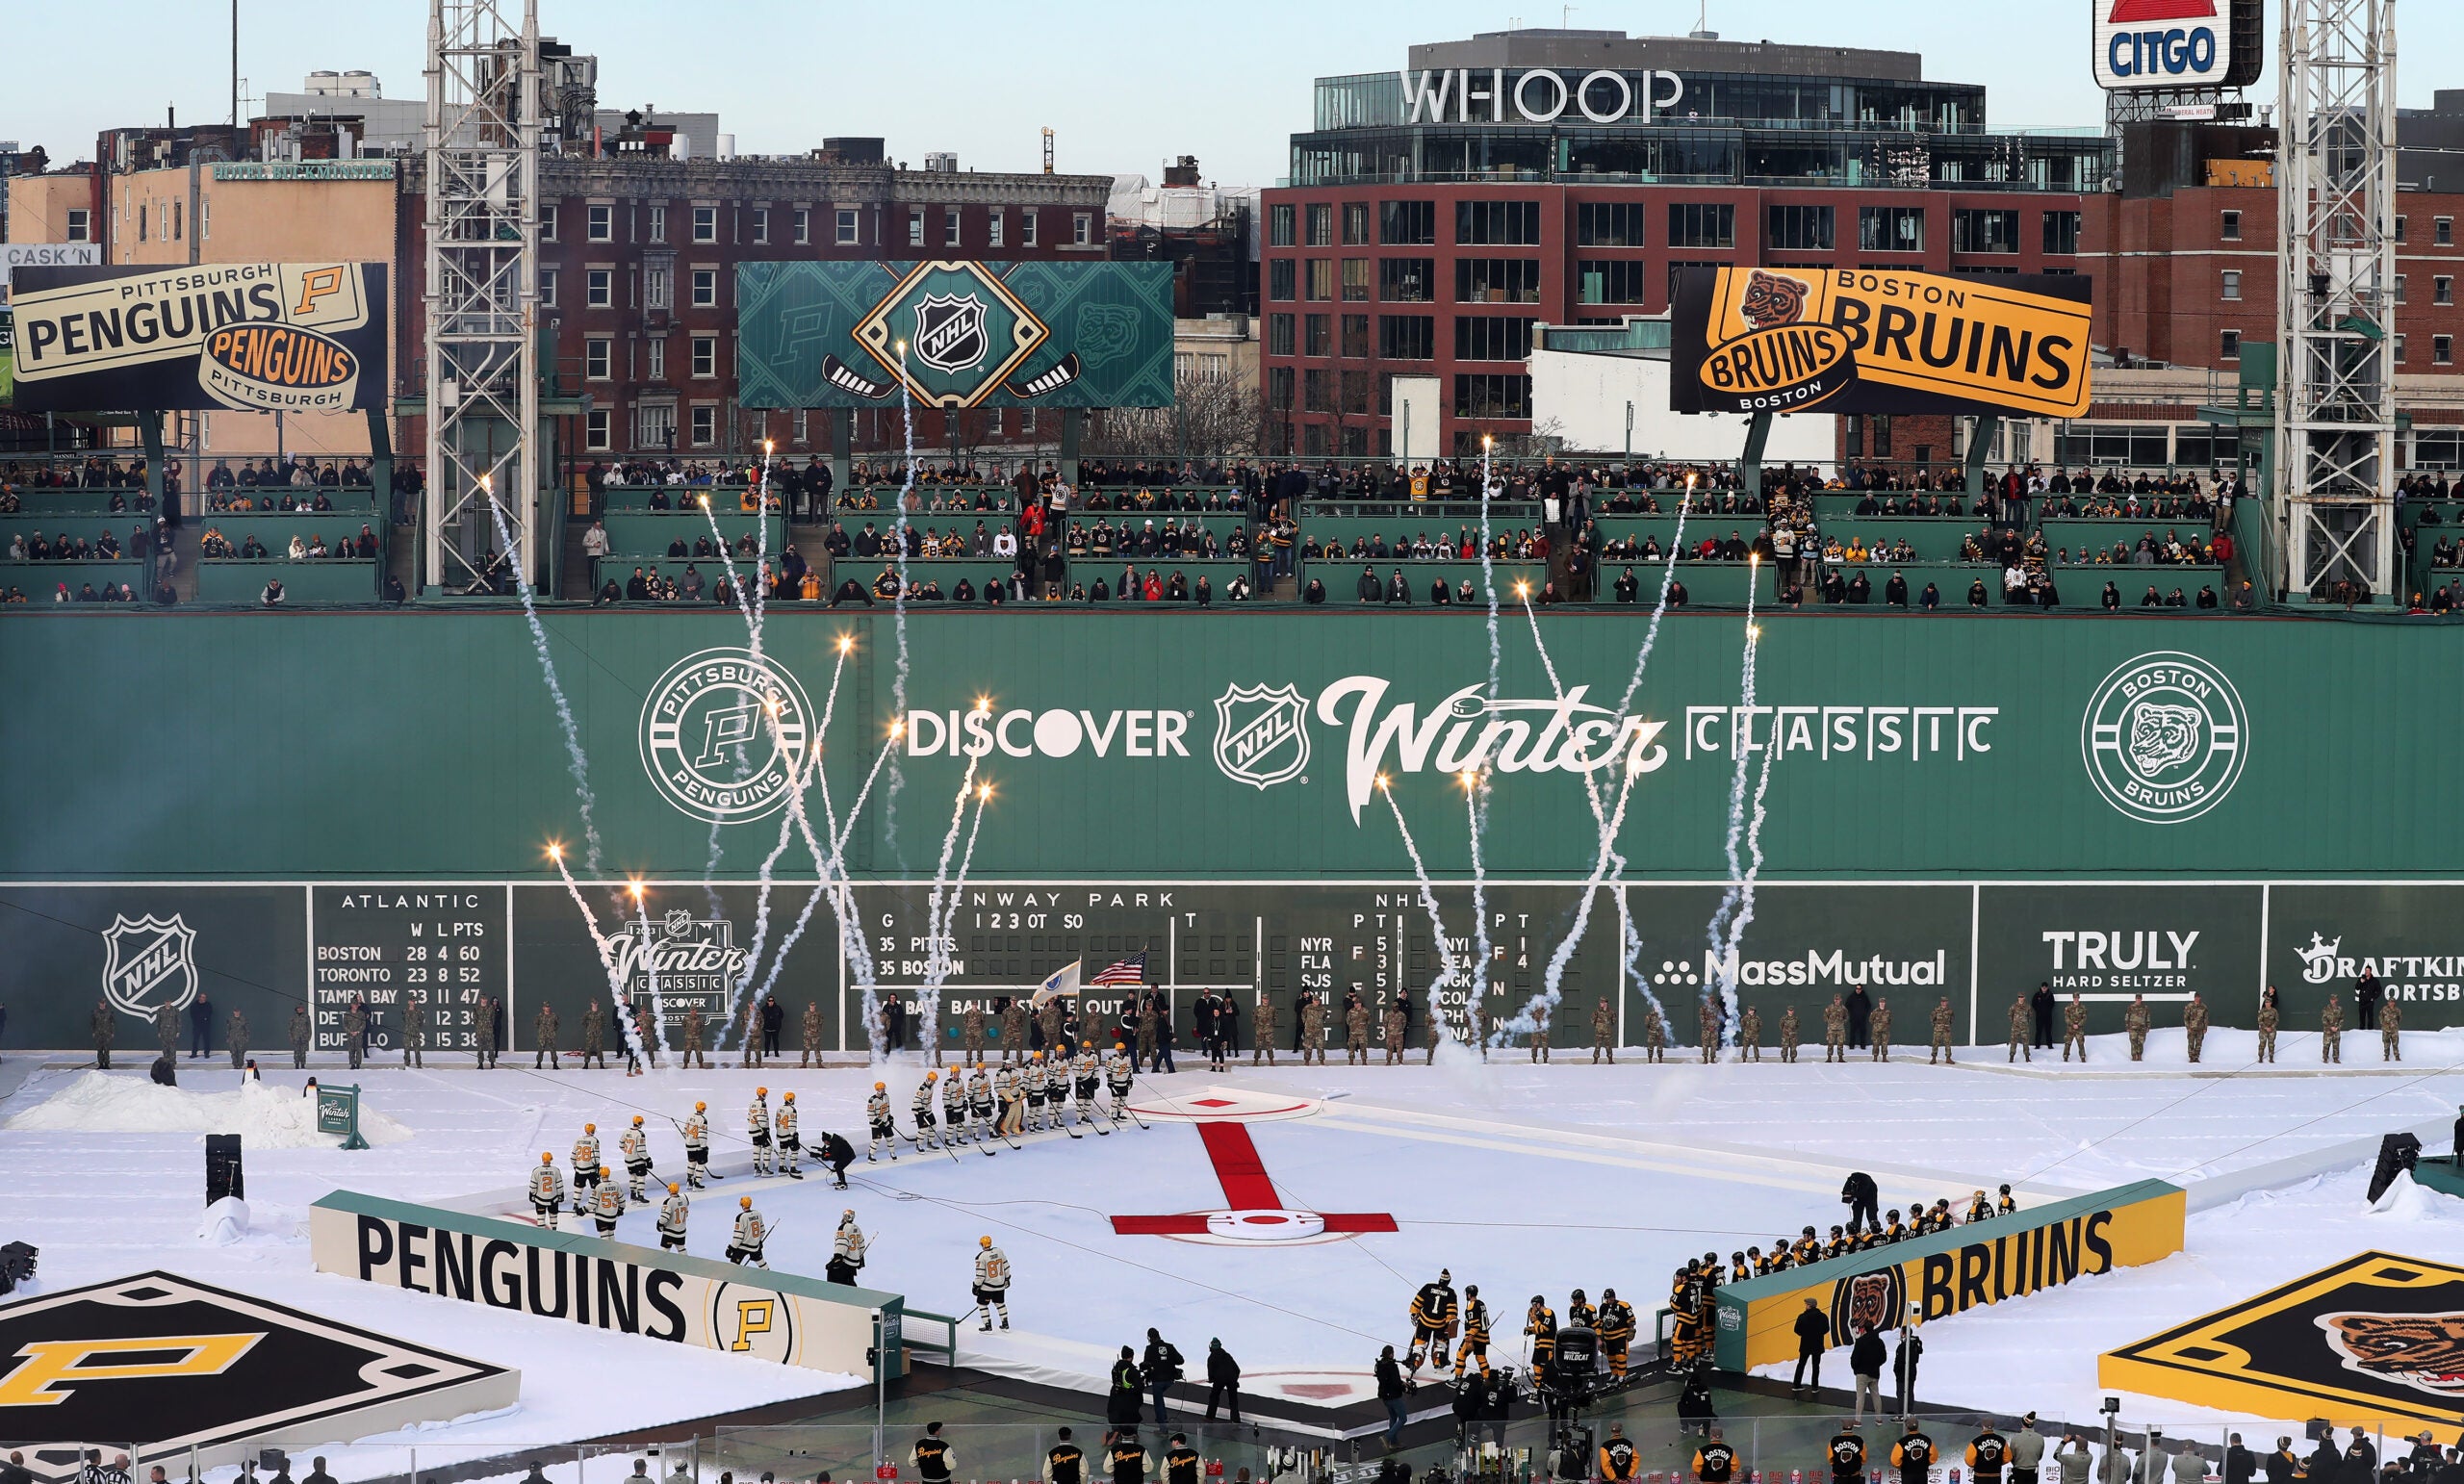 257 Bridgestone Nhl Winter Classic Boston Bruins Family Skate Stock Photos,  High-Res Pictures, and Images - Getty Images